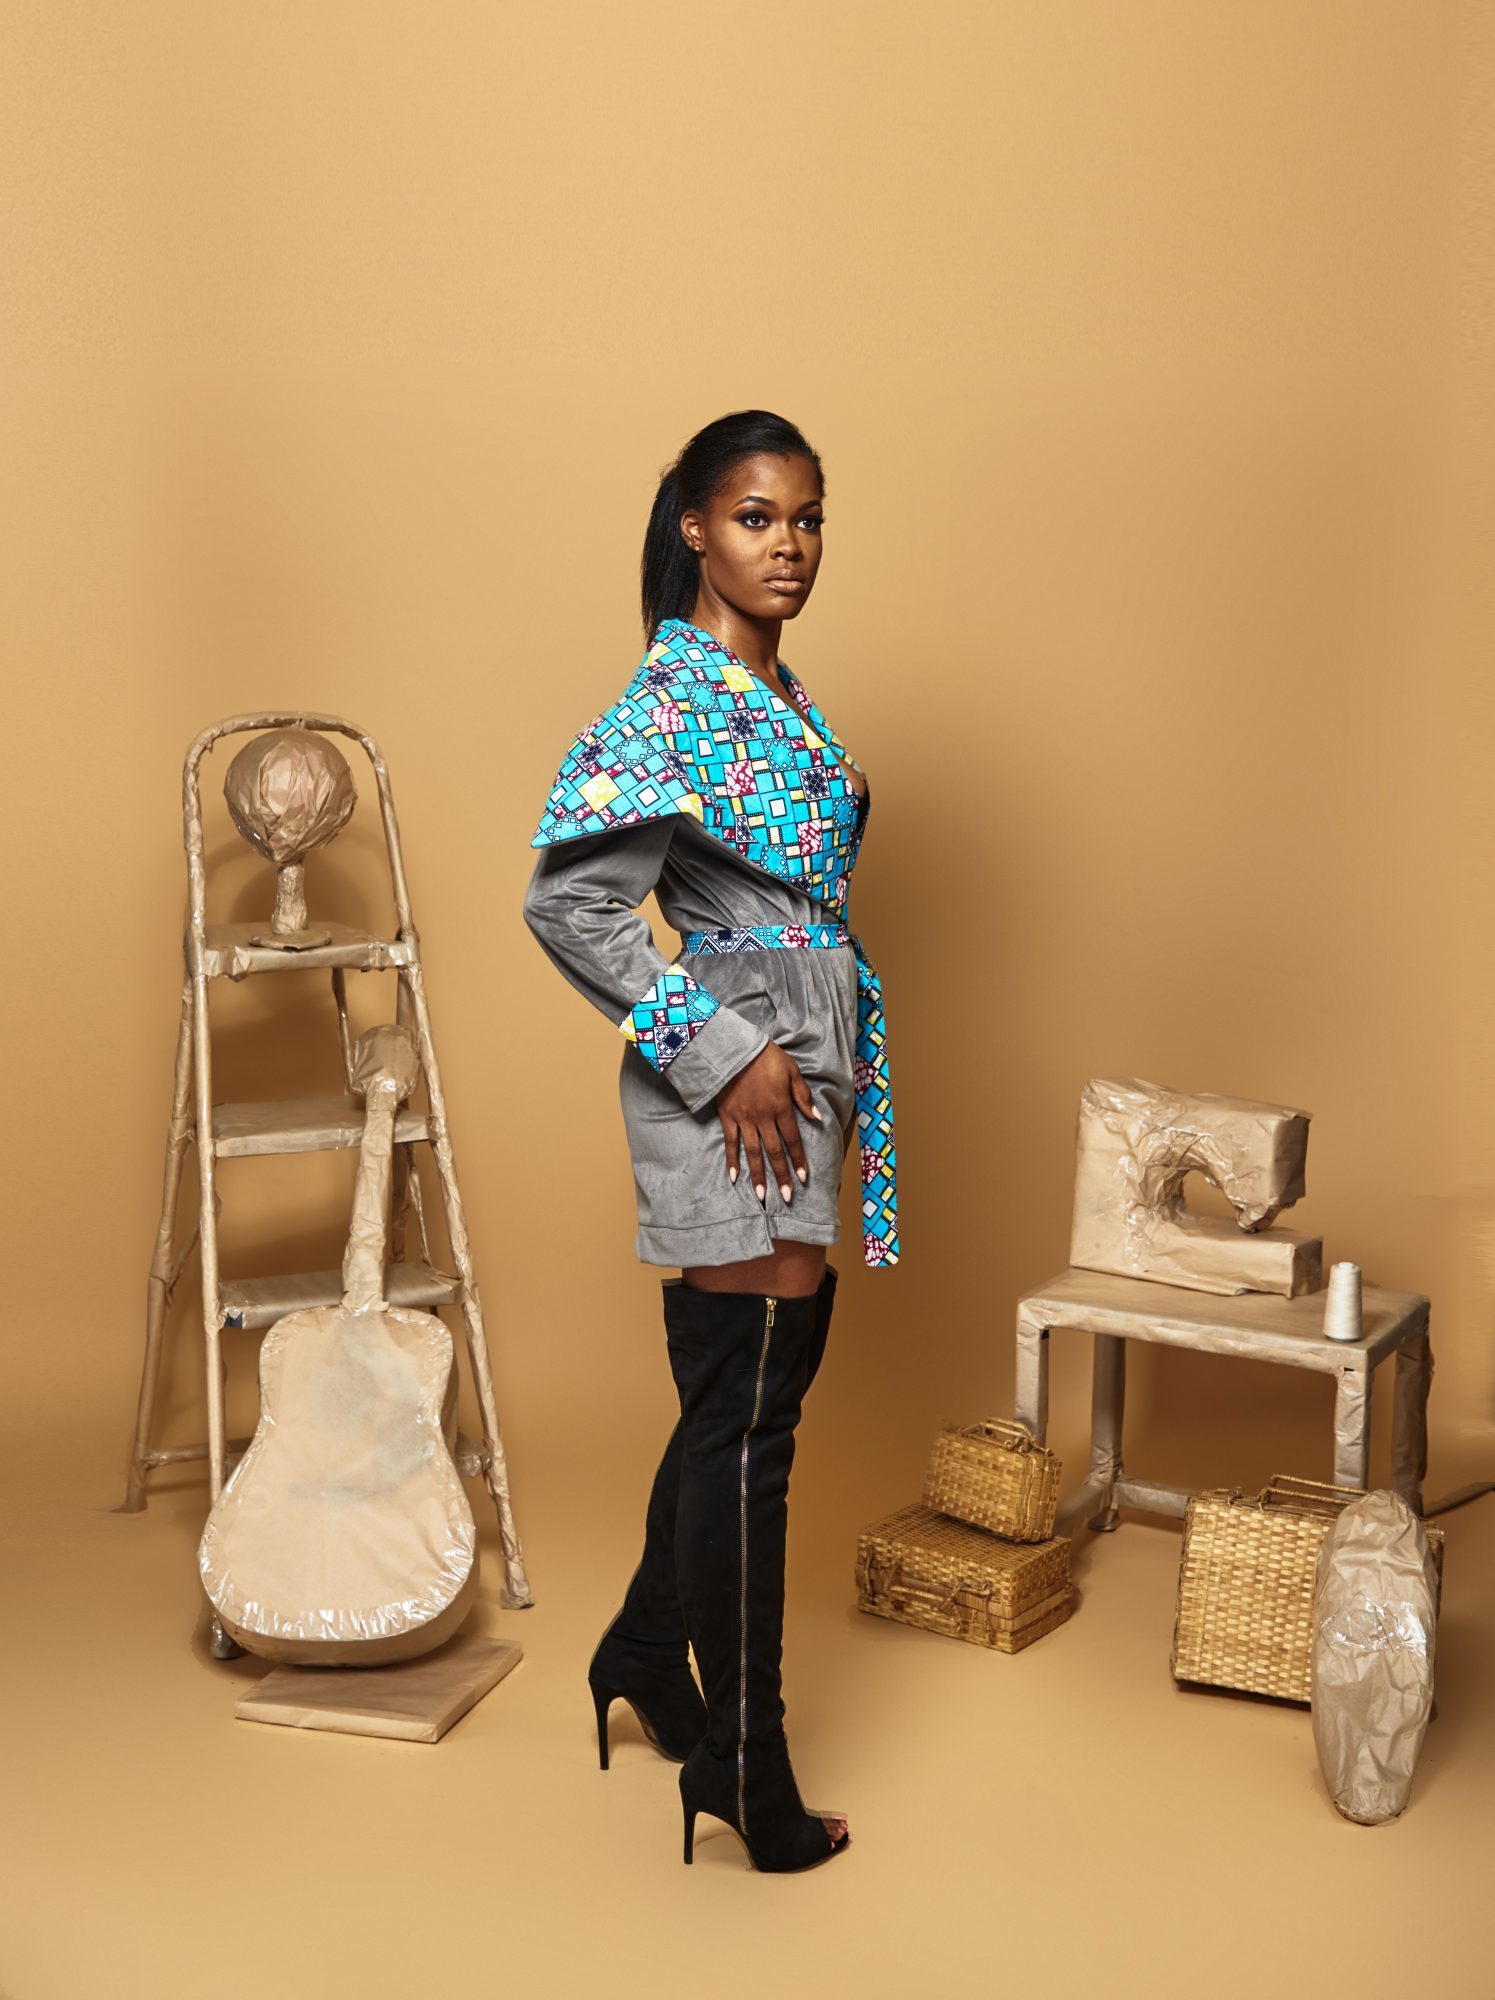 Afor Tumban debuts her personal style in Phoenix #Ankara #Cameroon #Couture #AfricanPrint